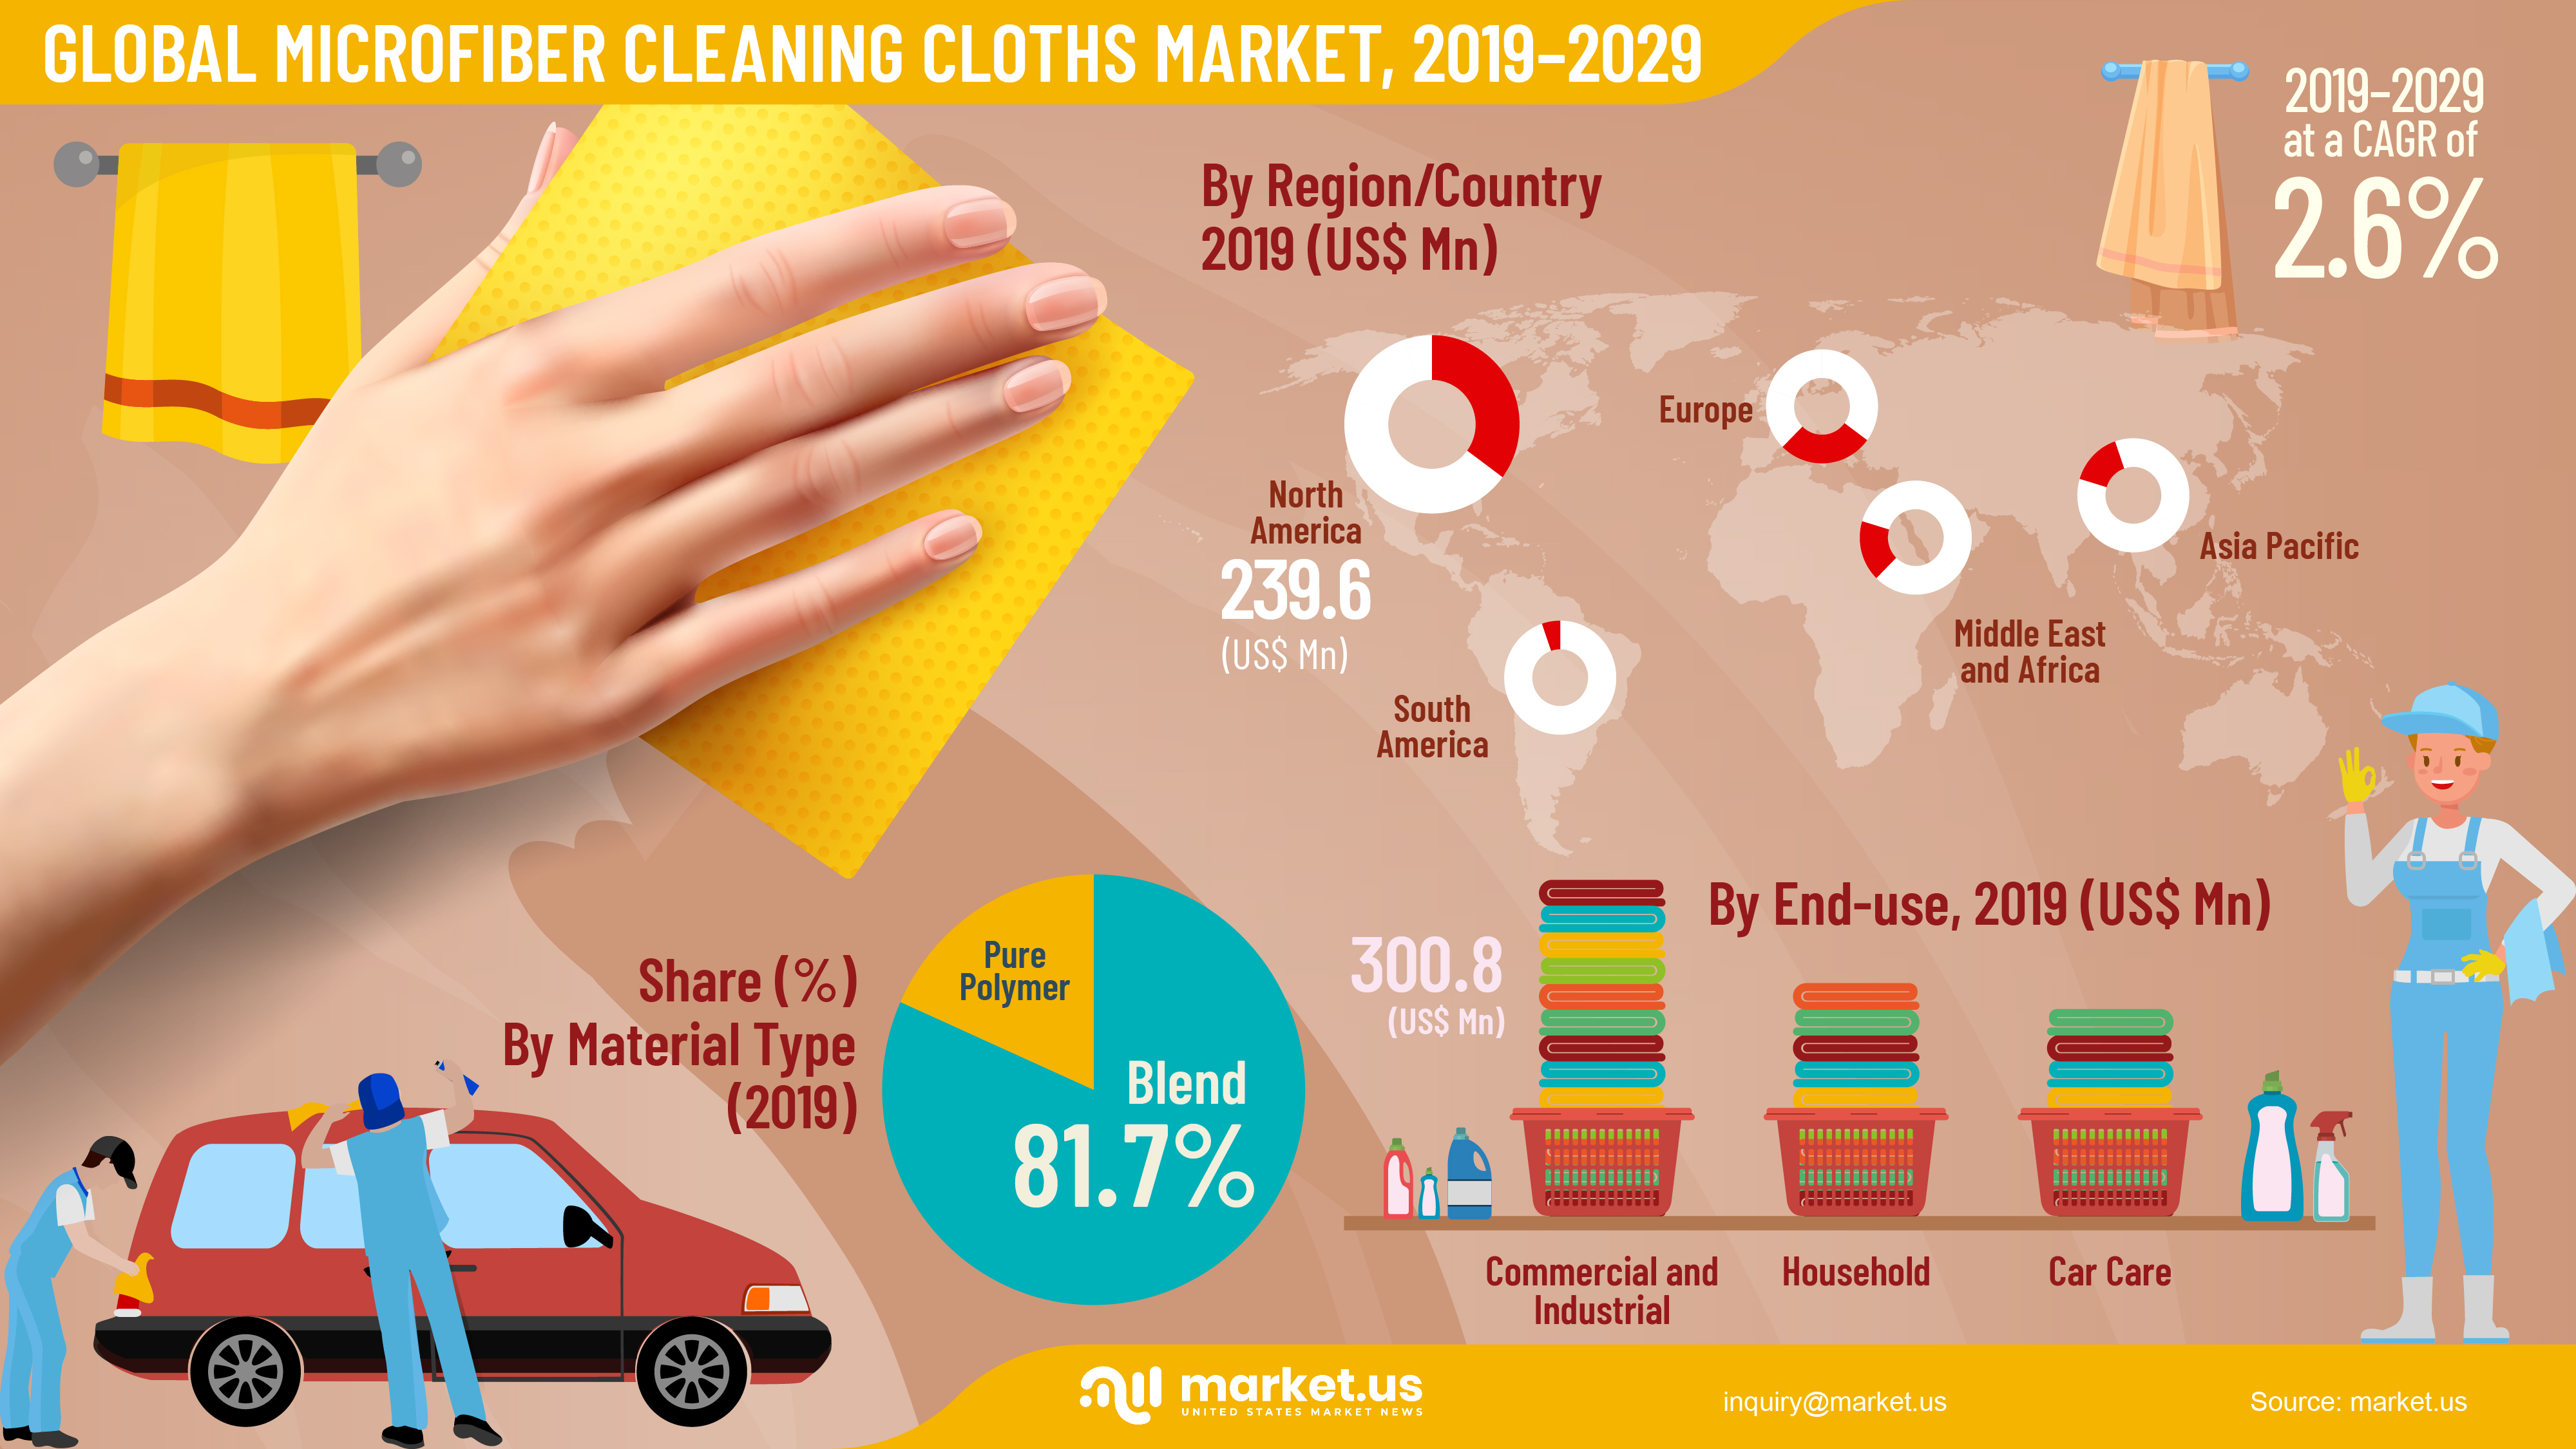 Global Microfiber Cleaning Cloths Market